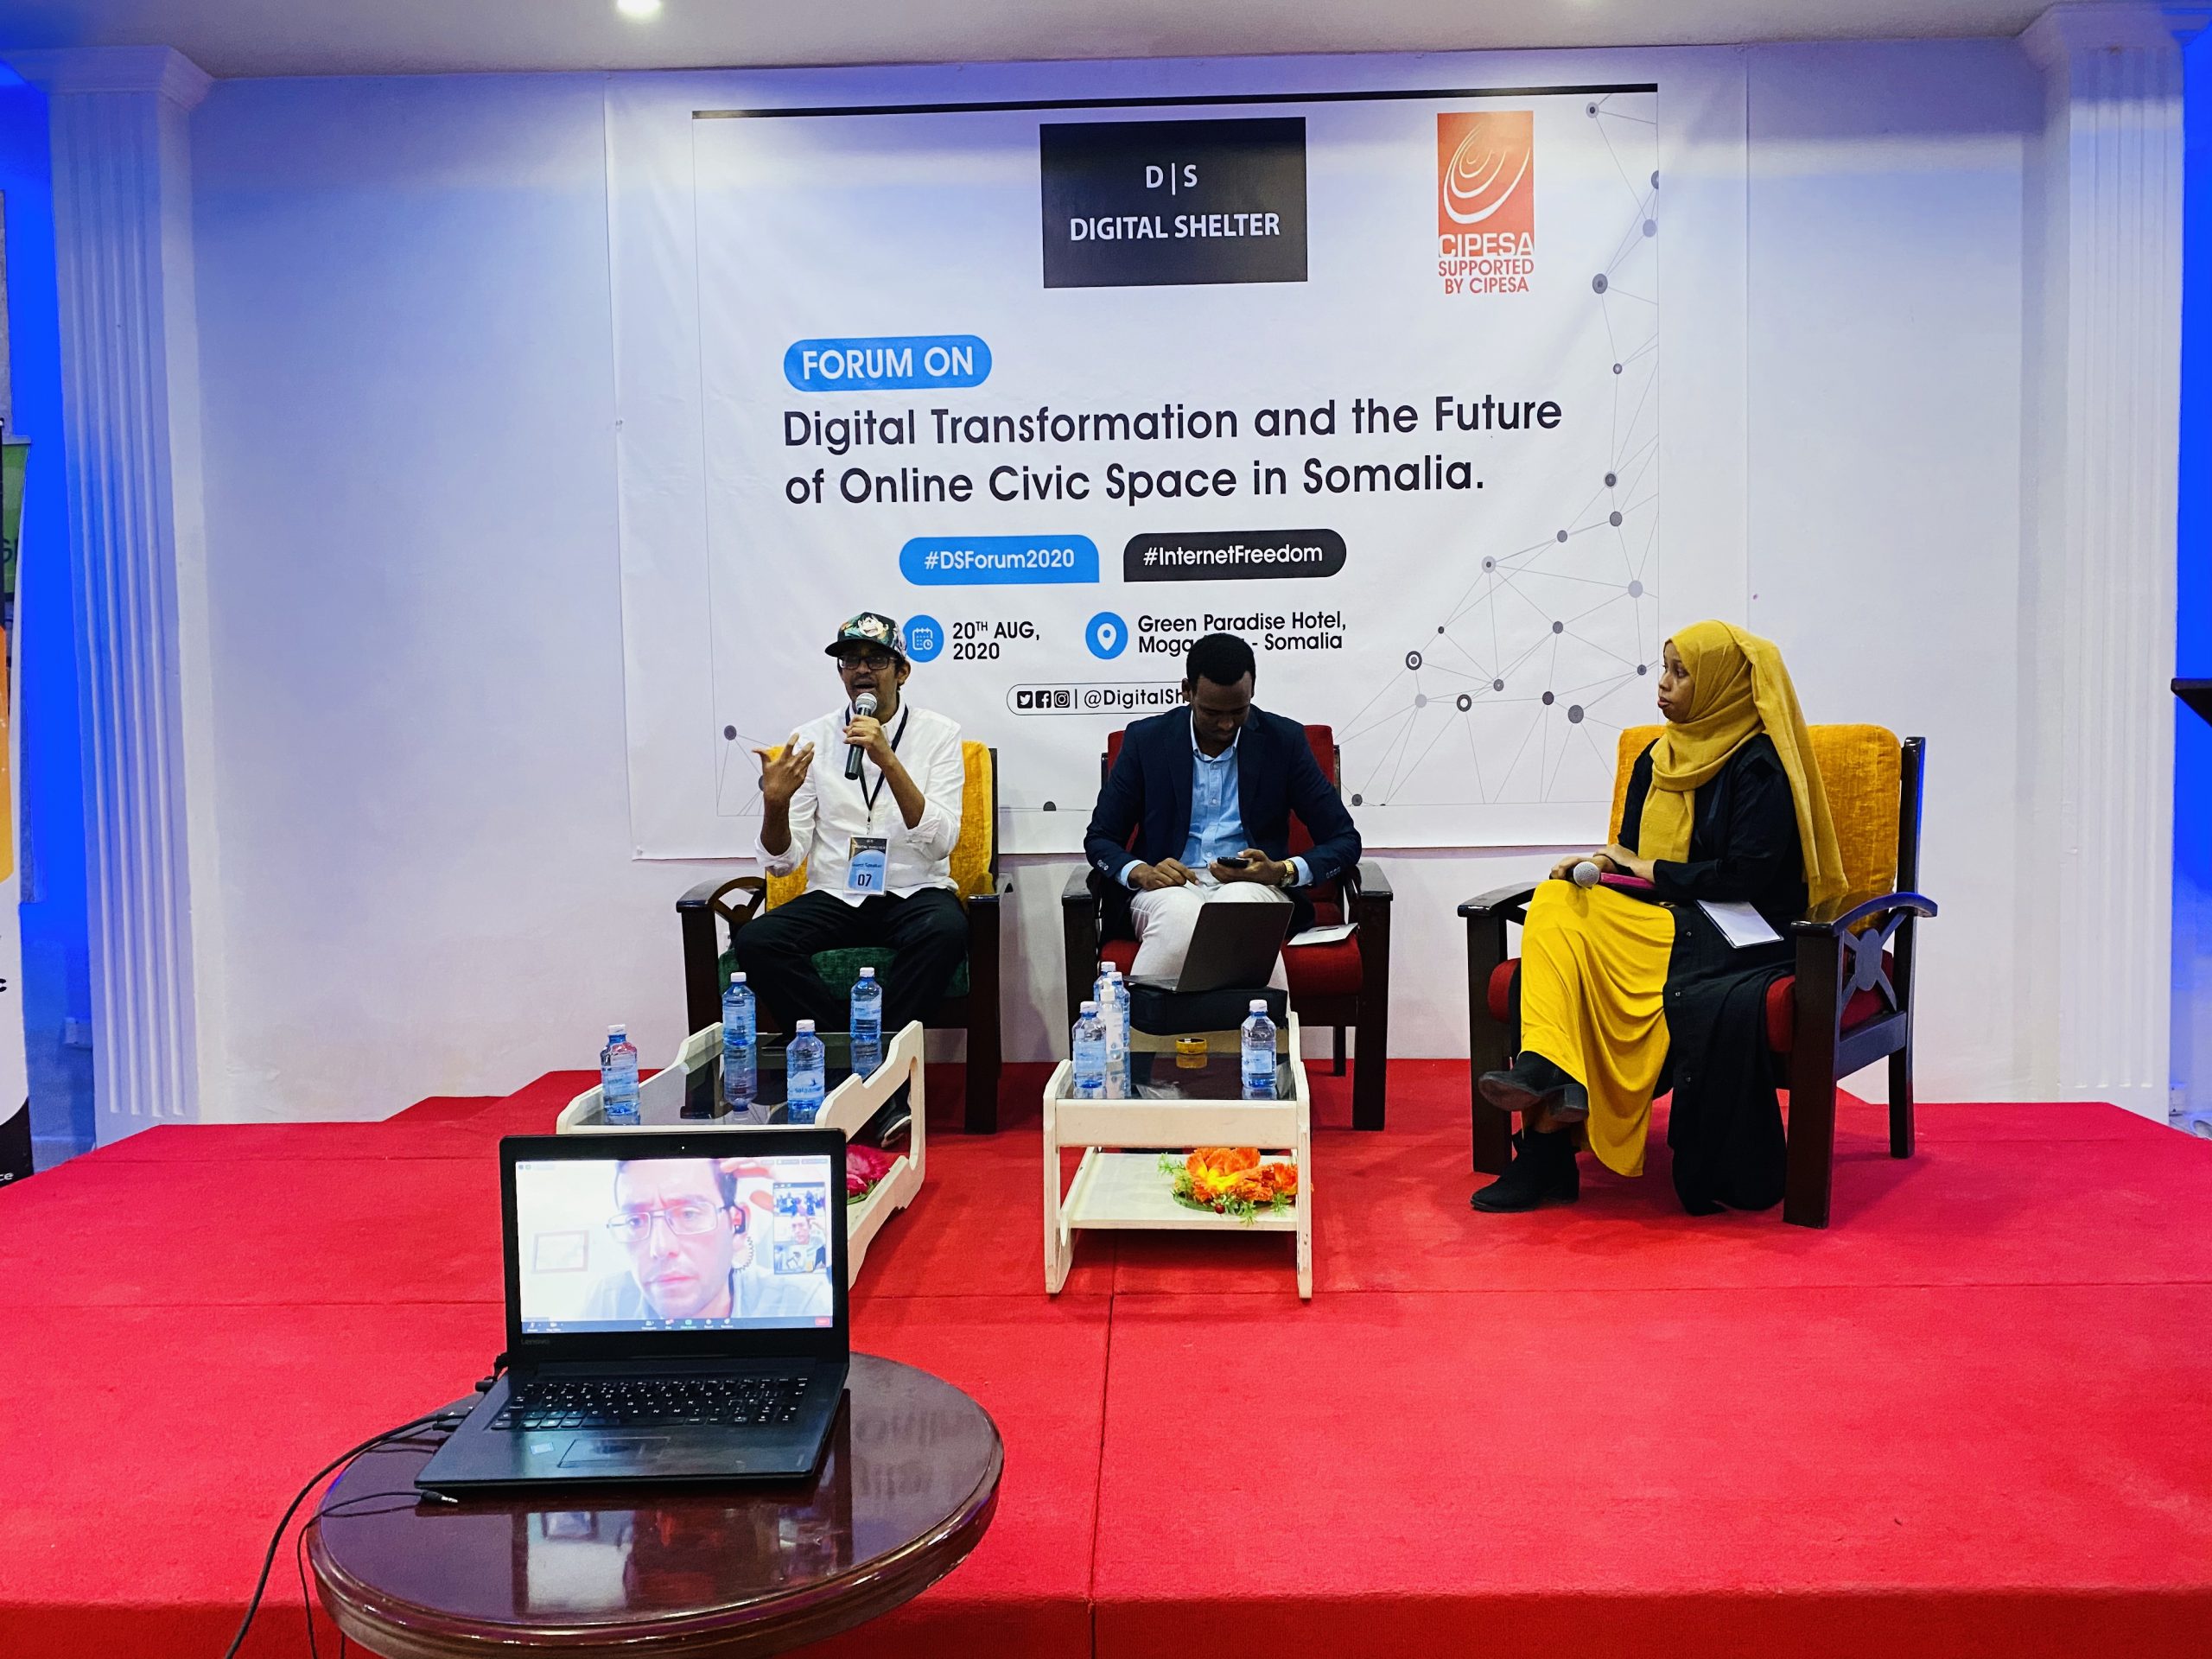 Digital Transformation and the Future of Online Civic Space in Somalia